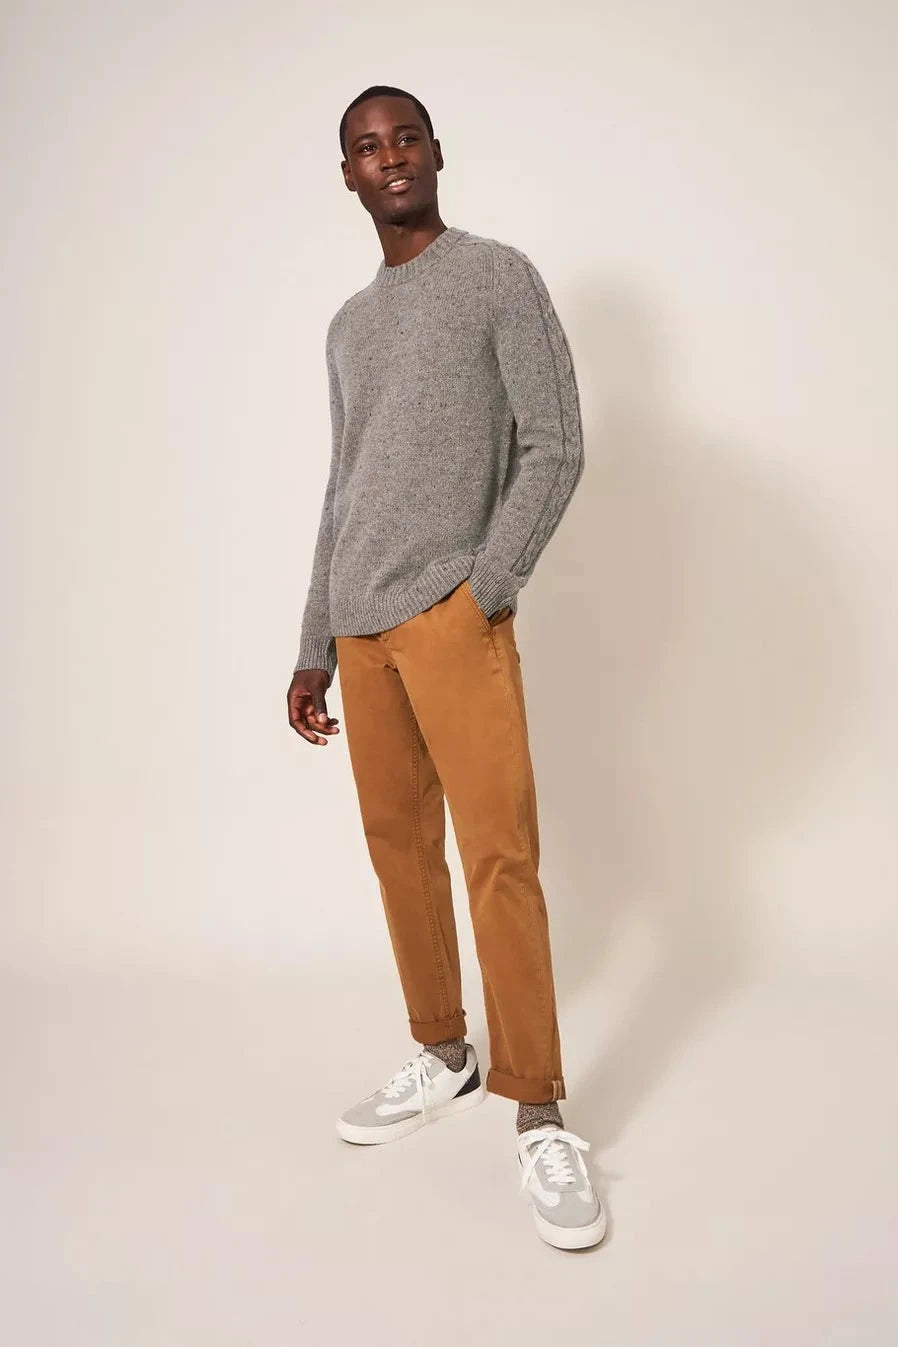 White Stuff Arundel Crew-Mens-Ohh! By Gum - Shop Sustainable